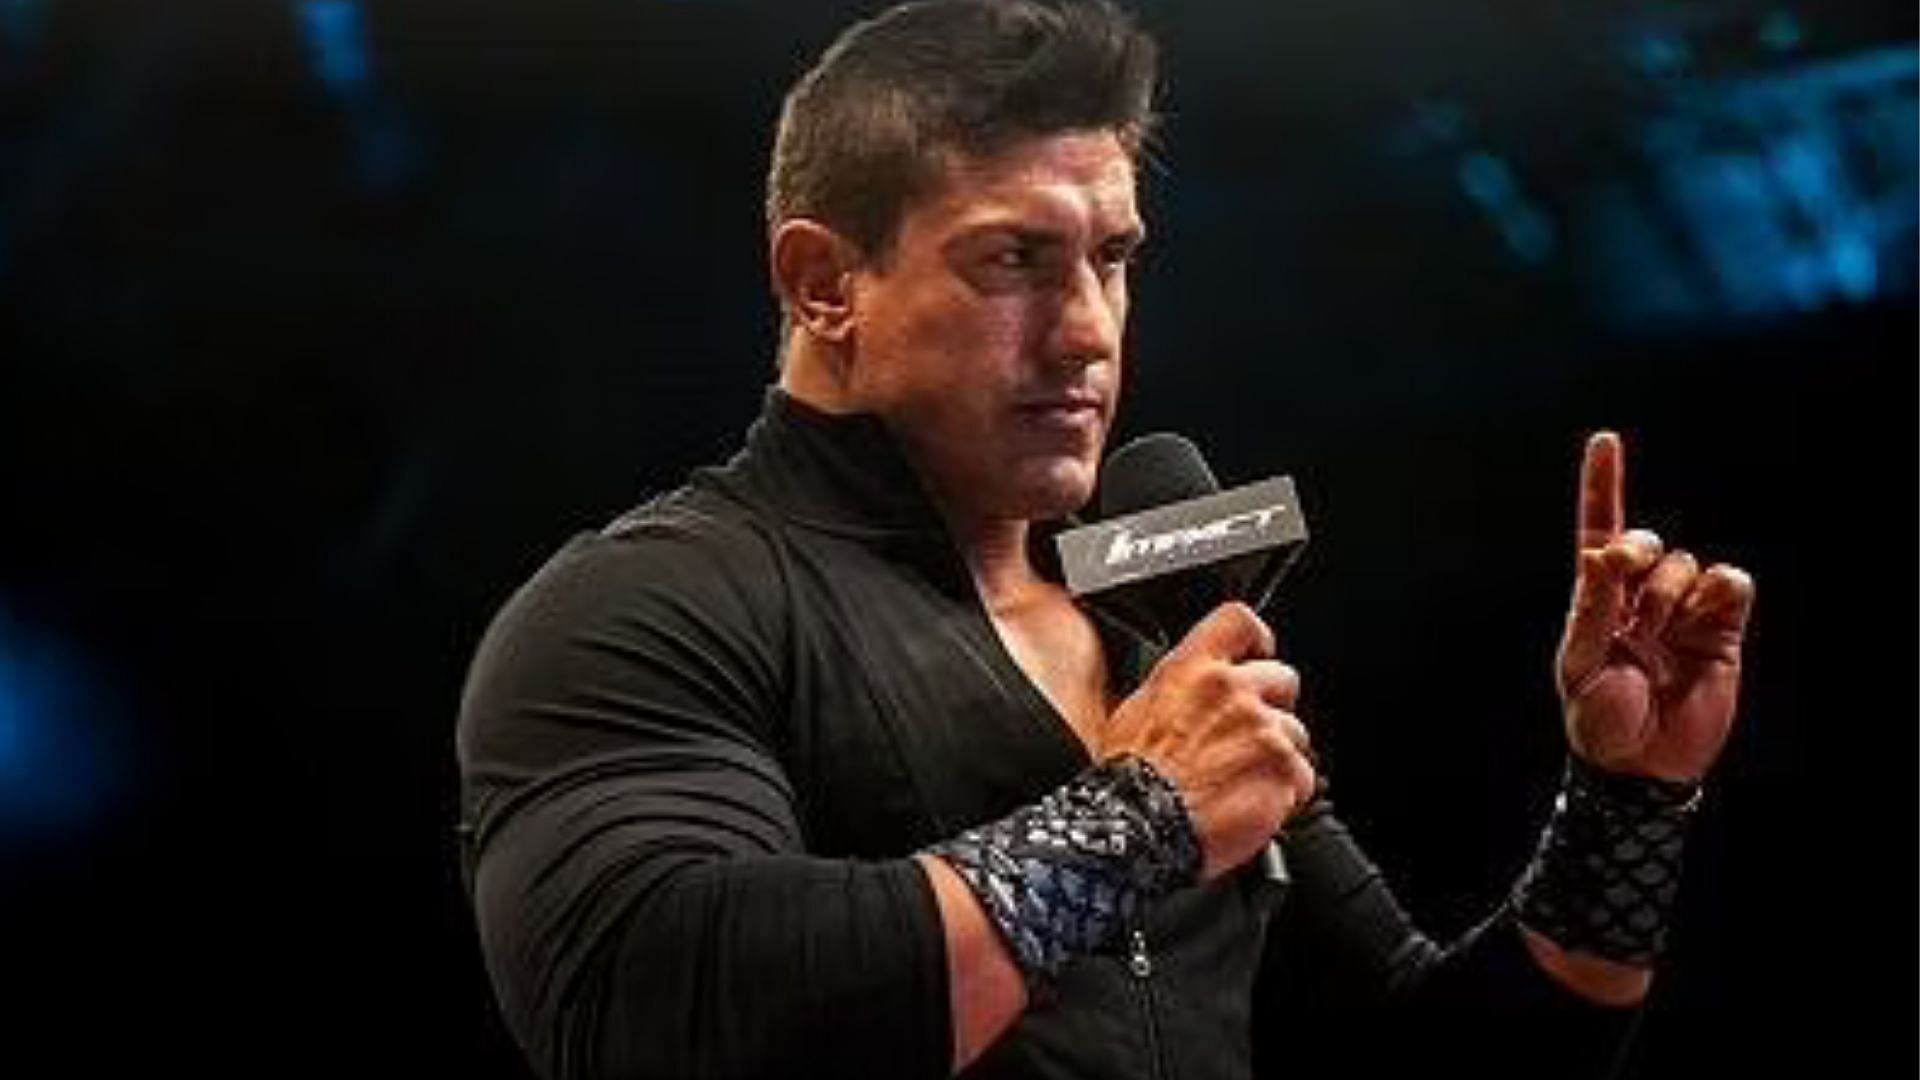 EC3 became a big attraction in TNA within a year.